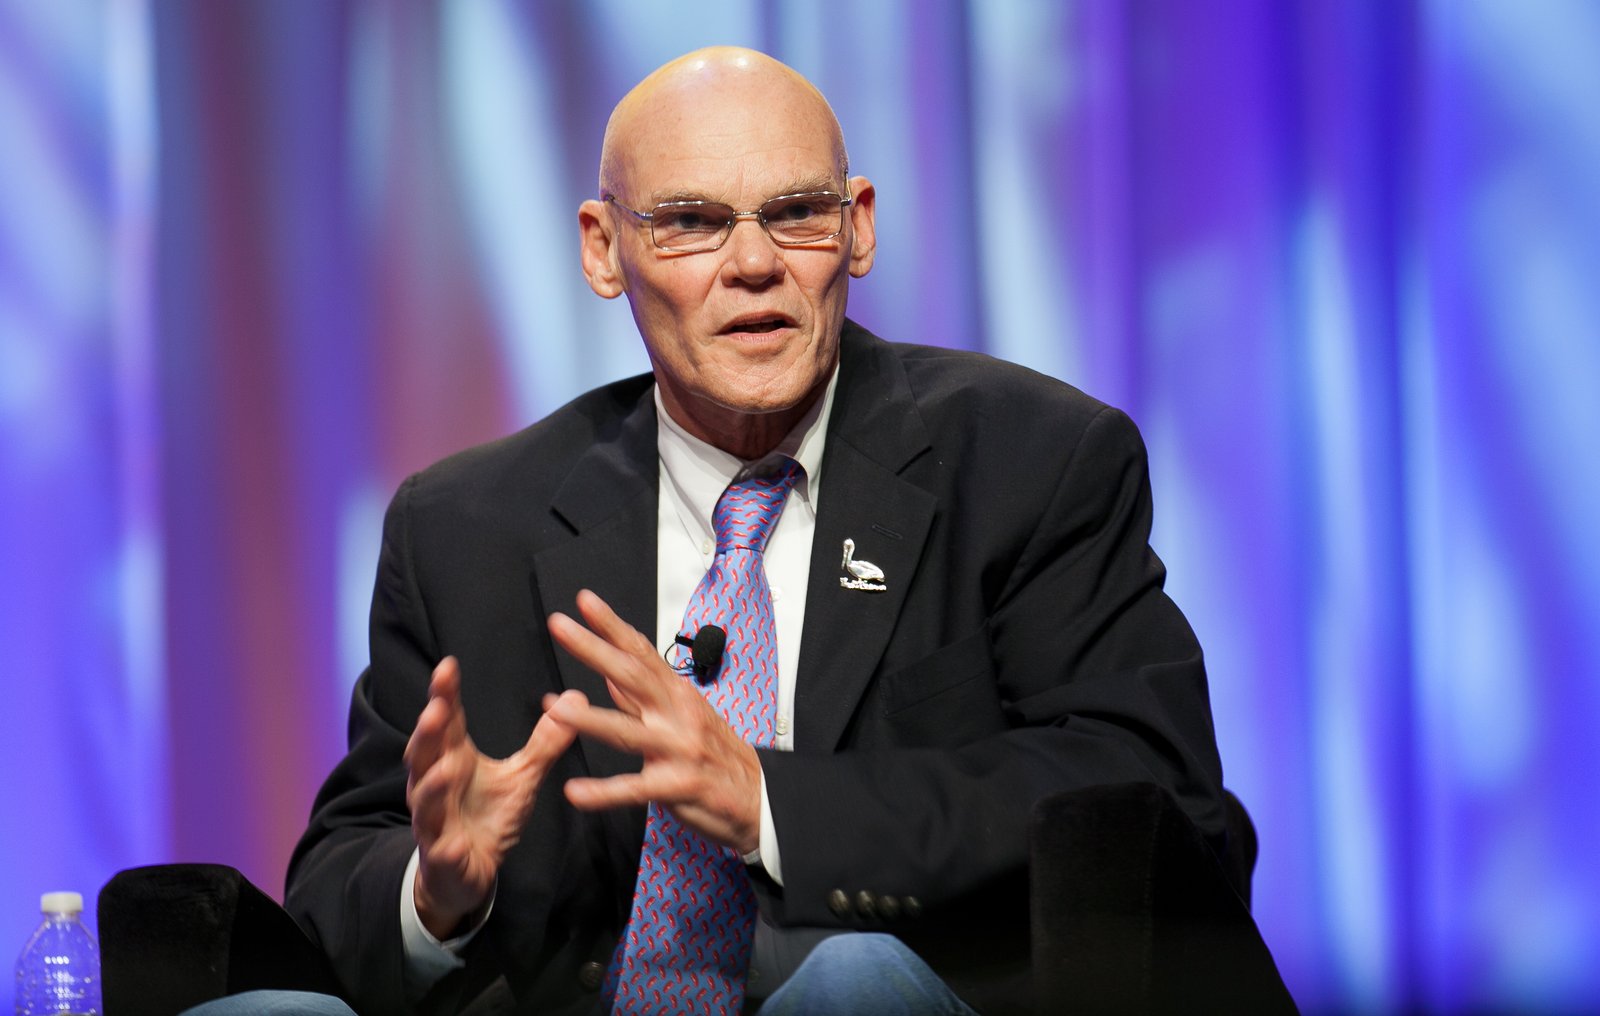 Democratic Strategist James Carville Criticizes Biden's Poll Numbers and Party Composition